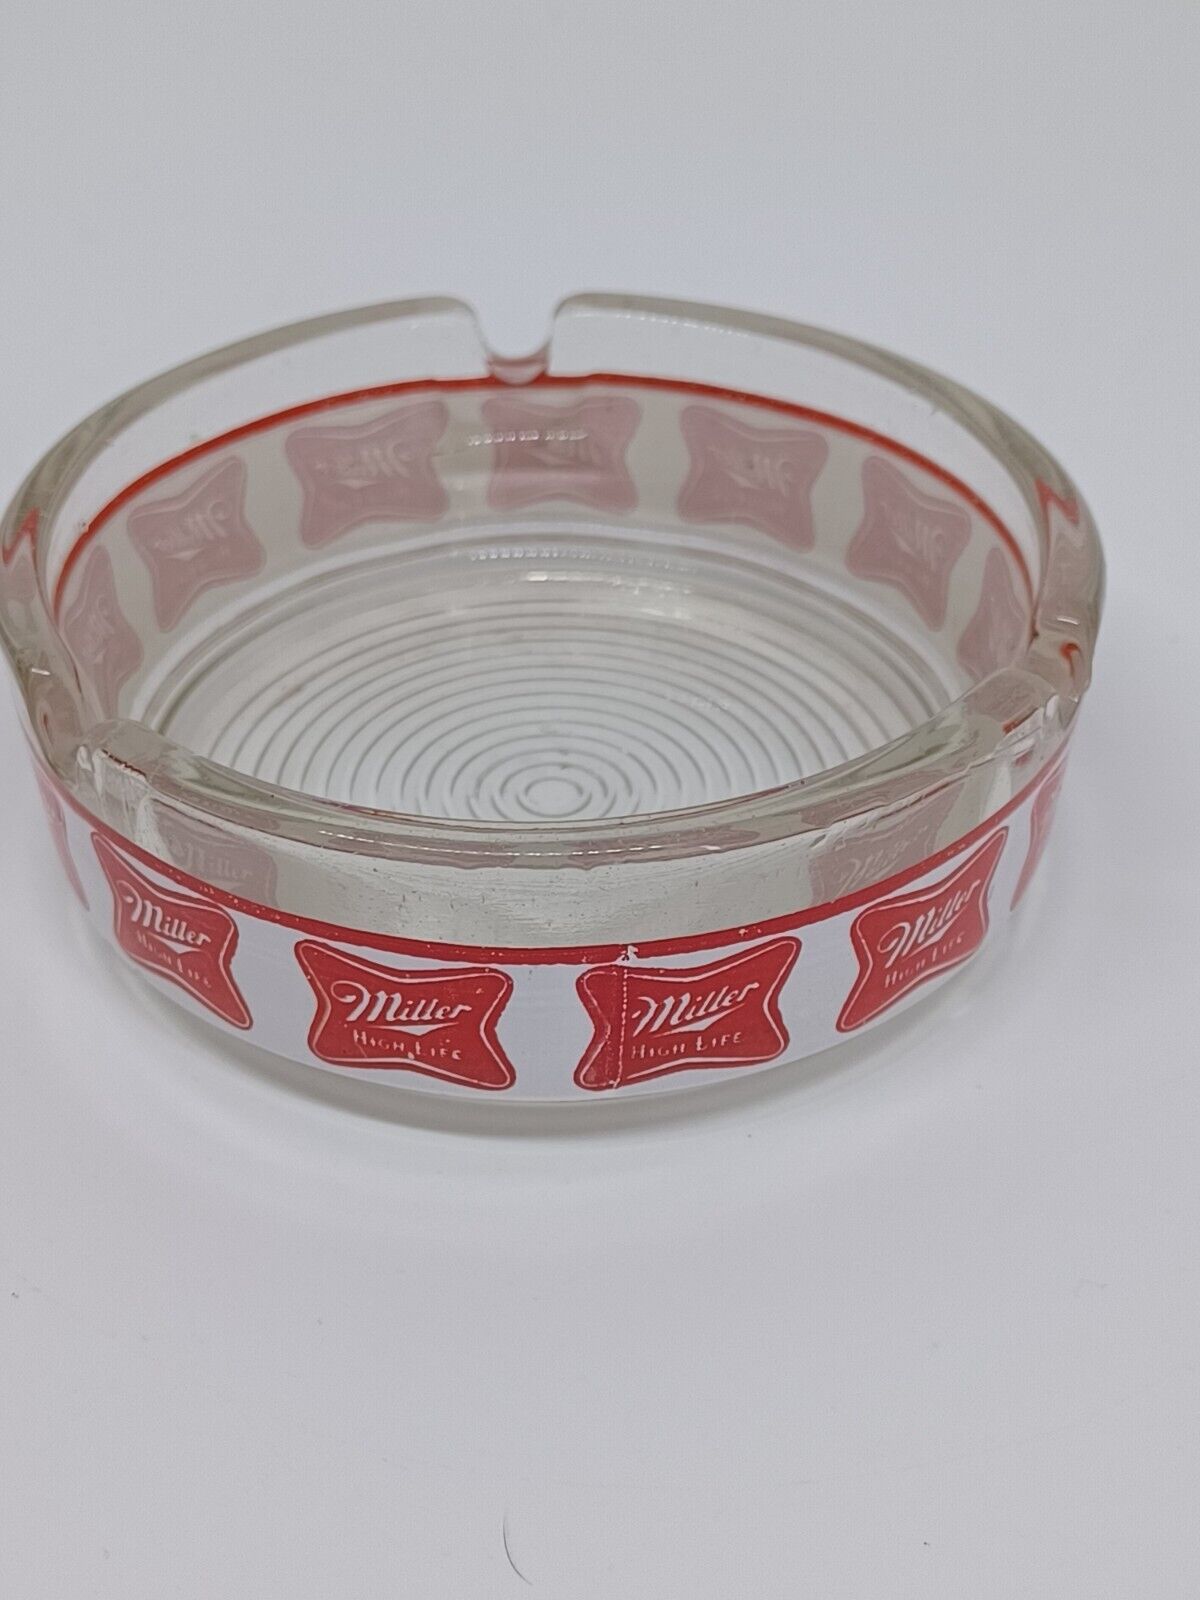 Vintage VTG Miller High Life Glass Ashtray Man Cave Red White 4 inch Classic